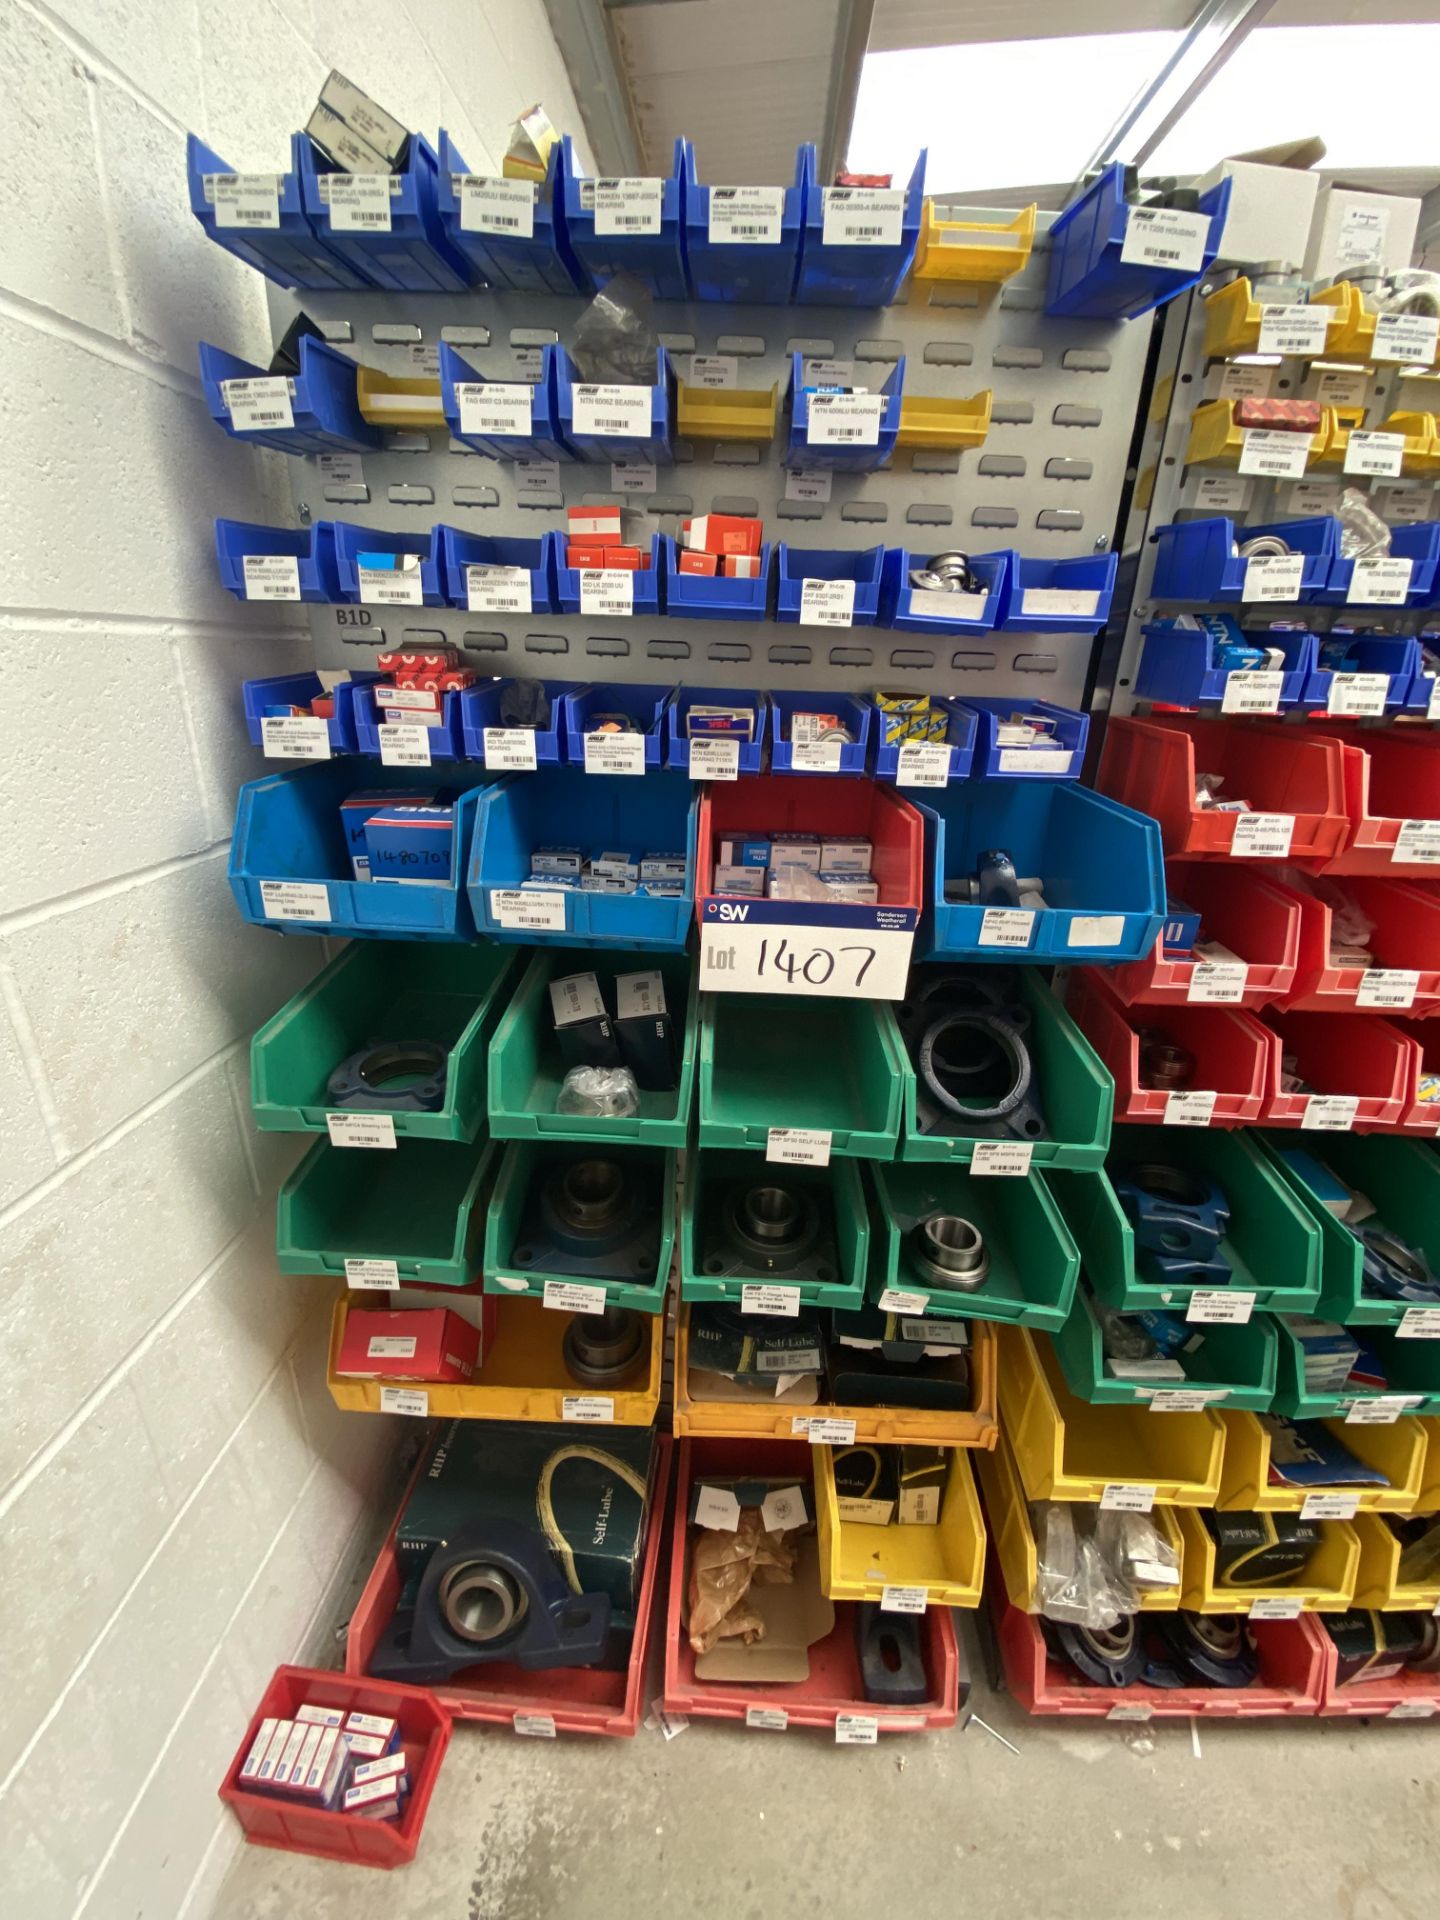 Assorted Fastenings & Fittings, including electrical consumables, with plastic stacking binsPlease